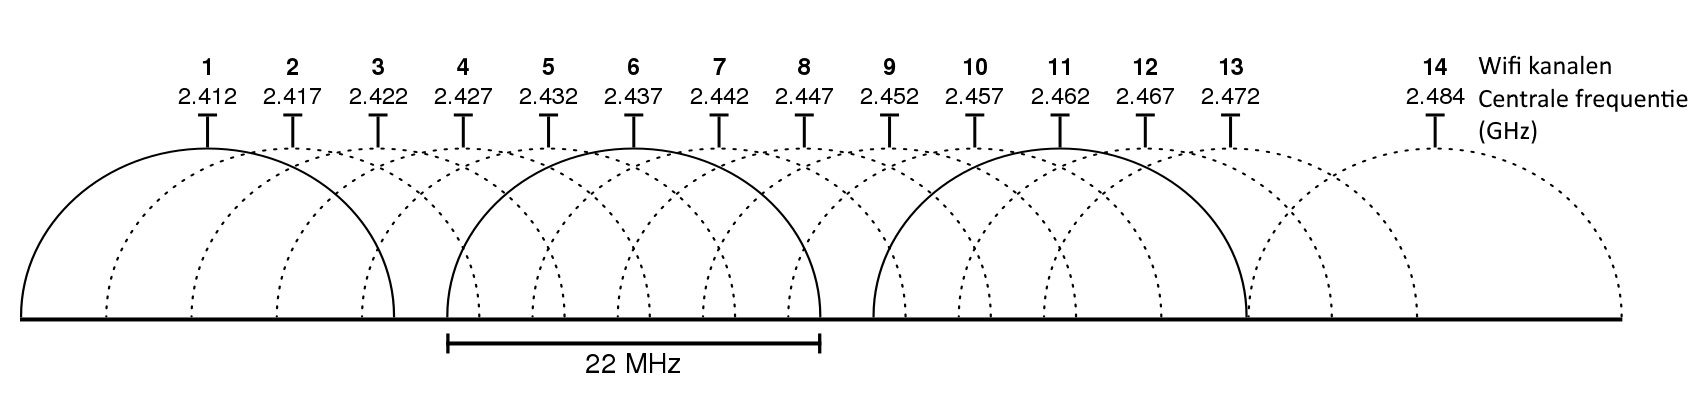 2,4GHz wifi frequenties